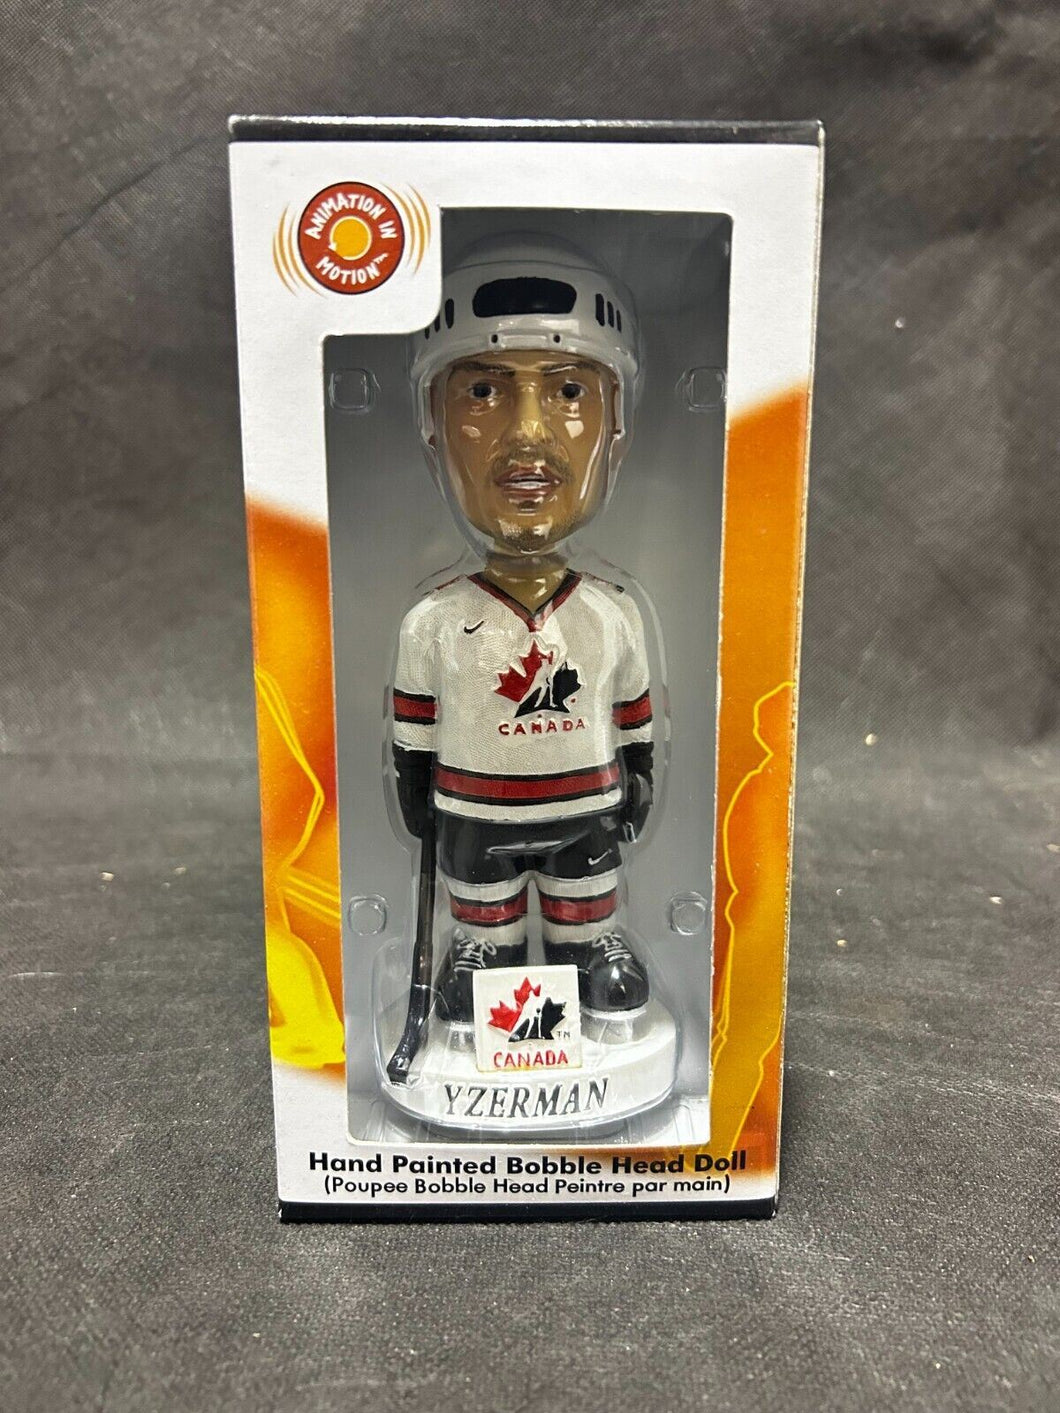 2002 Olympics Collectible Hand Painted Bobble Head Doll of Yzerman Team Canada